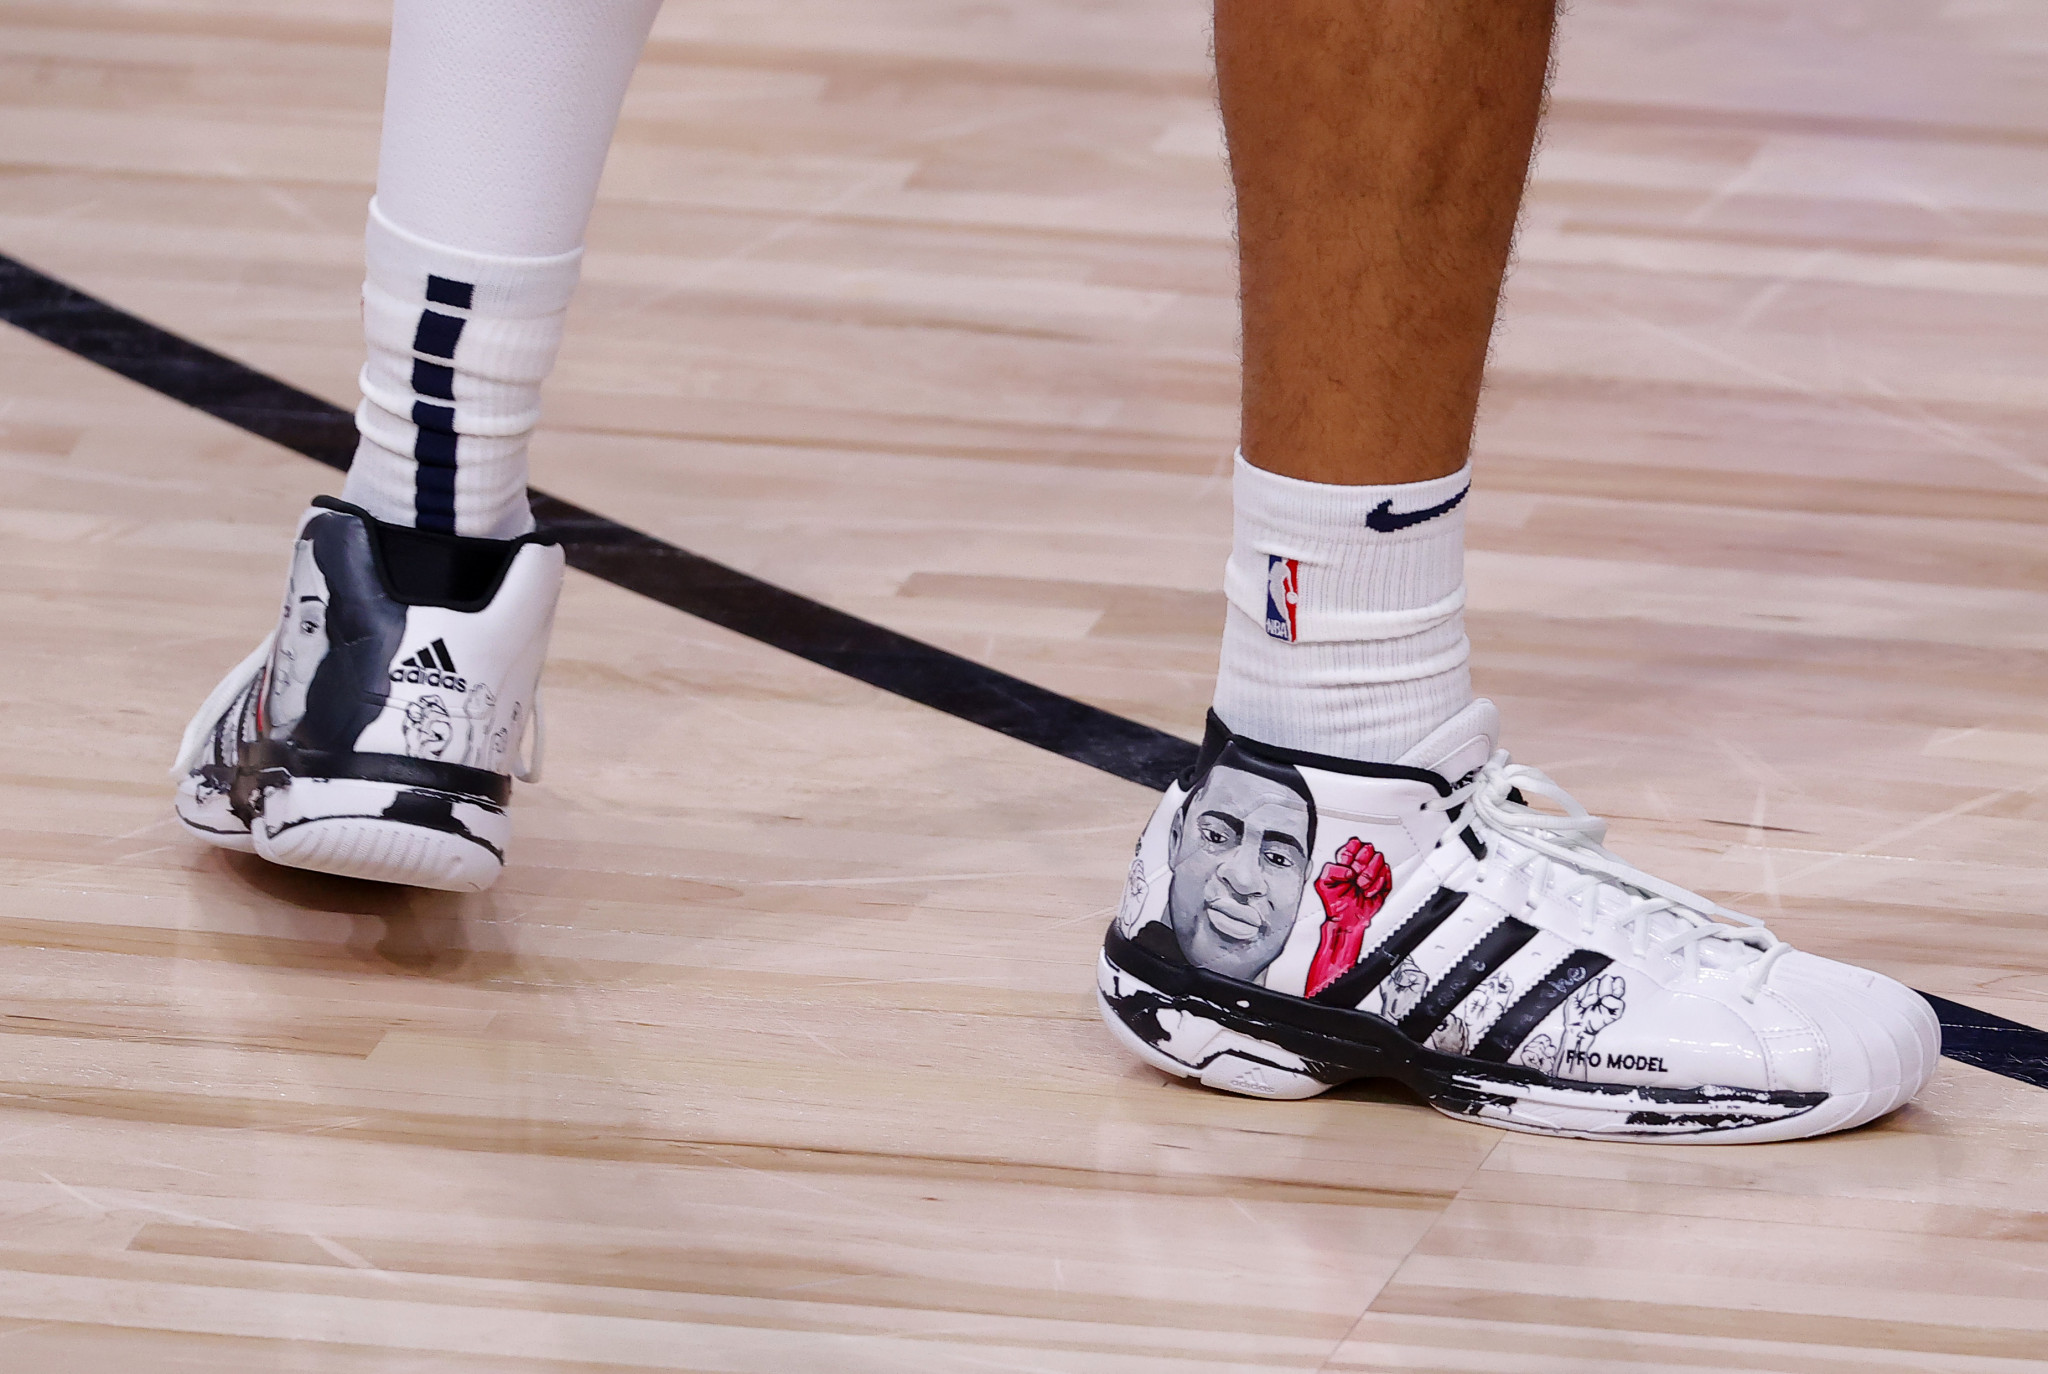 Basketball player Jamal Murray, who could feature at Tokyo 2020 should Canada come through a qualifying tournament, recently wore these shoes during a National Basketball Association game ©Getty Images